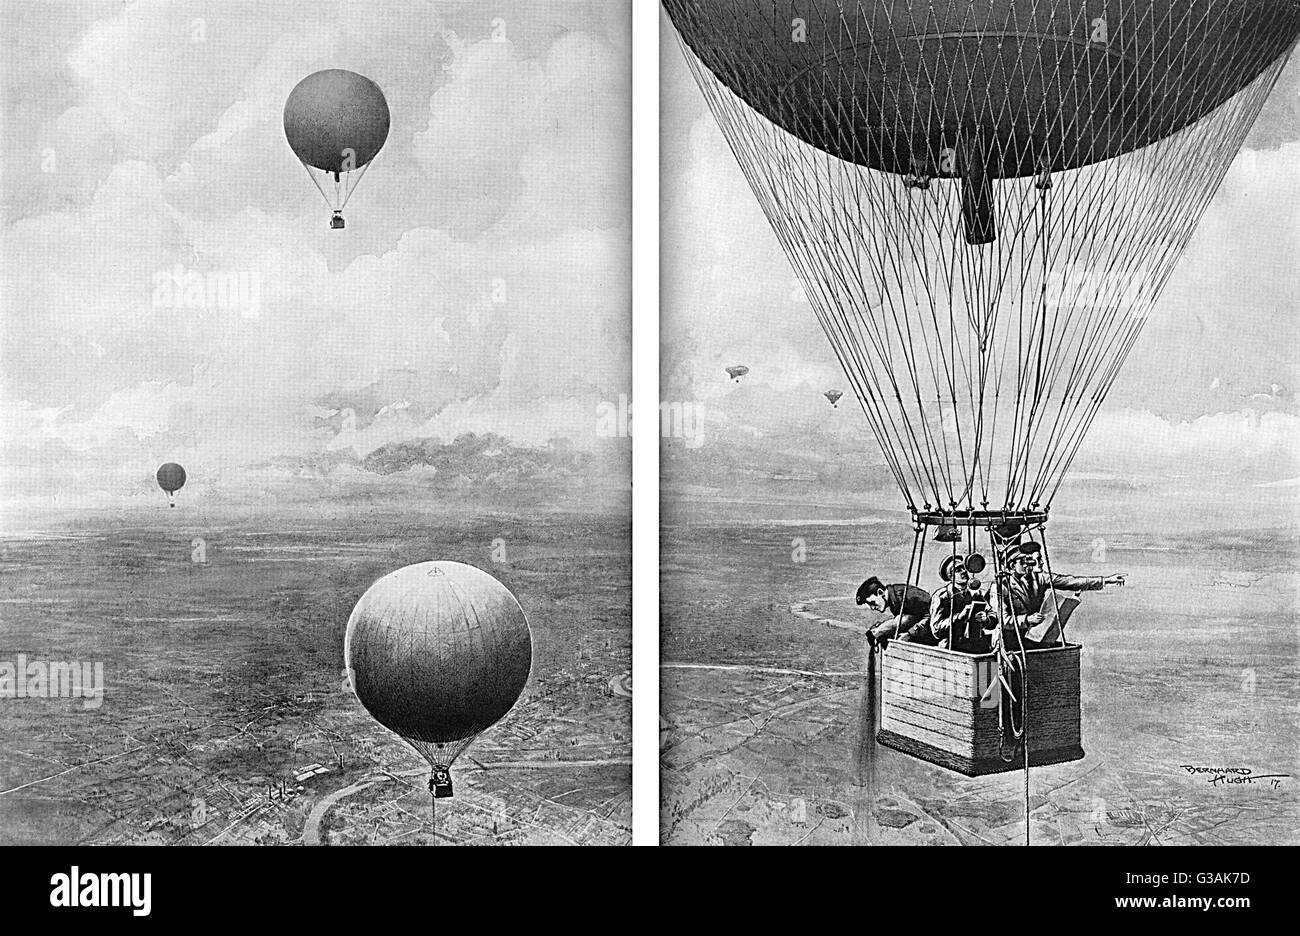 A school in the sky over London town - how officers are trained in the Royal Flying Corps.  Balloons flying over the capital, training RFC officers in observation and navigation skills in preparation for their role as pilots and navigators.  The balloons Stock Photo